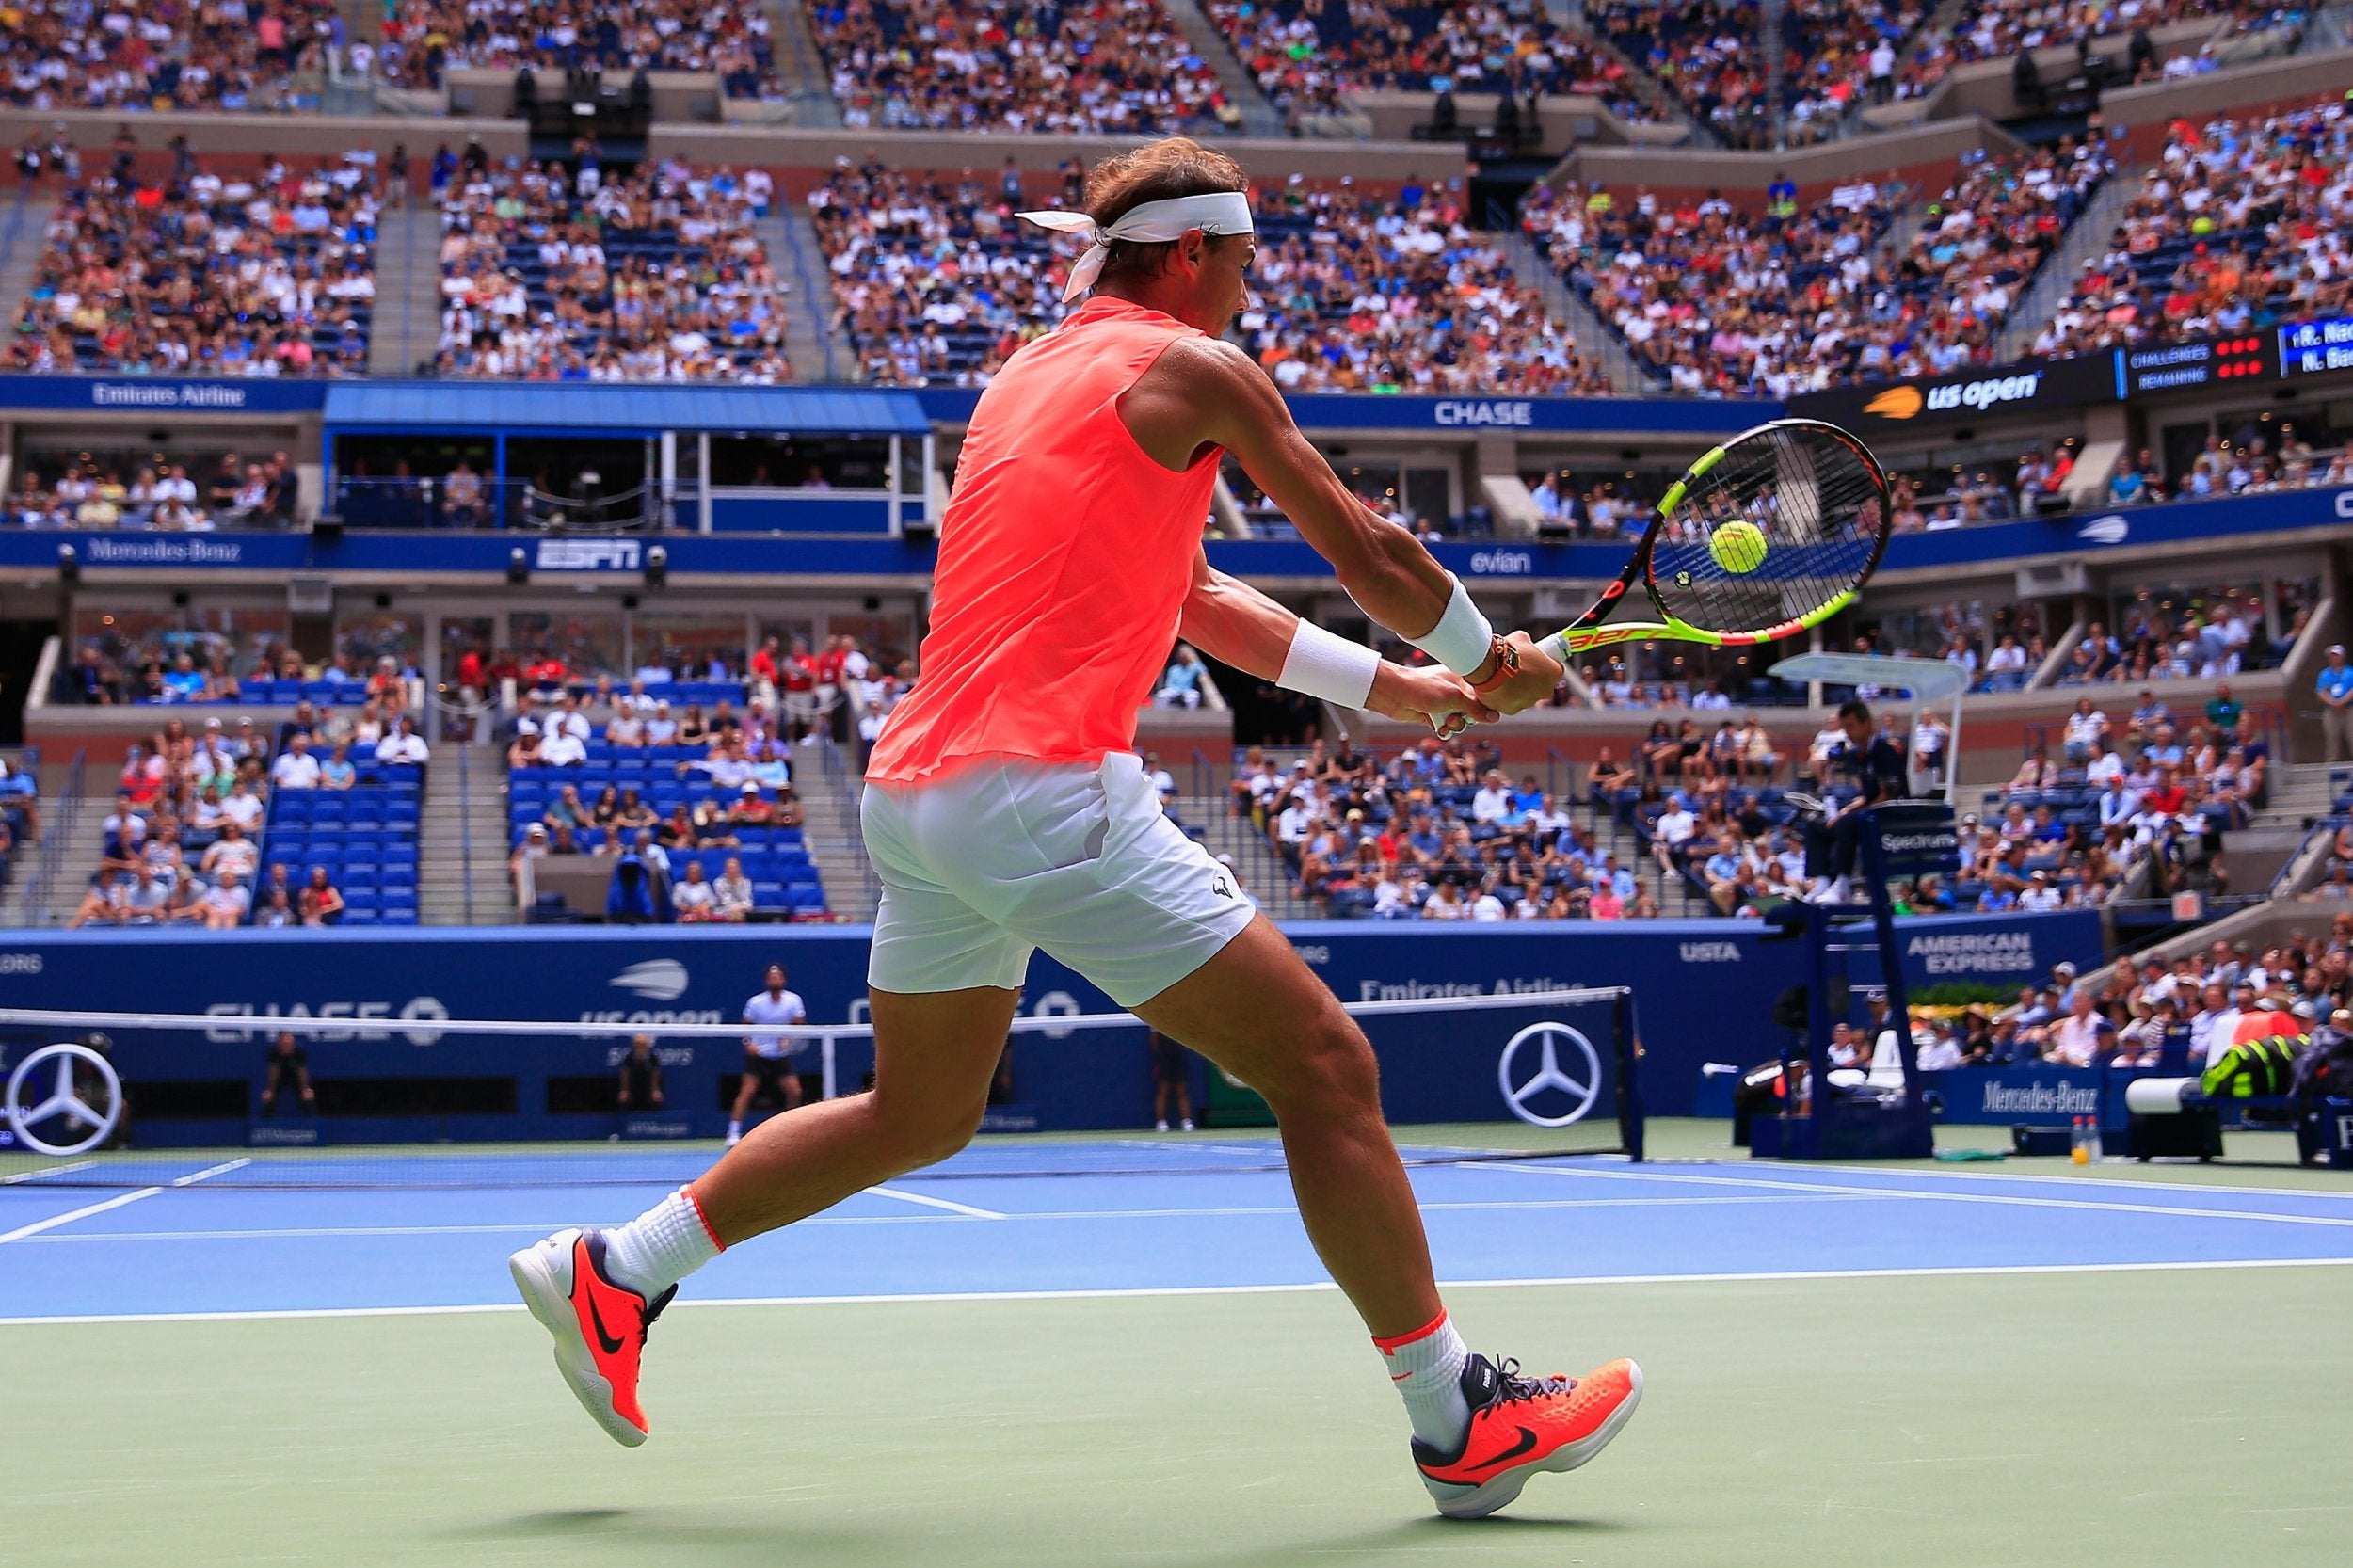 Nadal was made to work for his place in the last eight